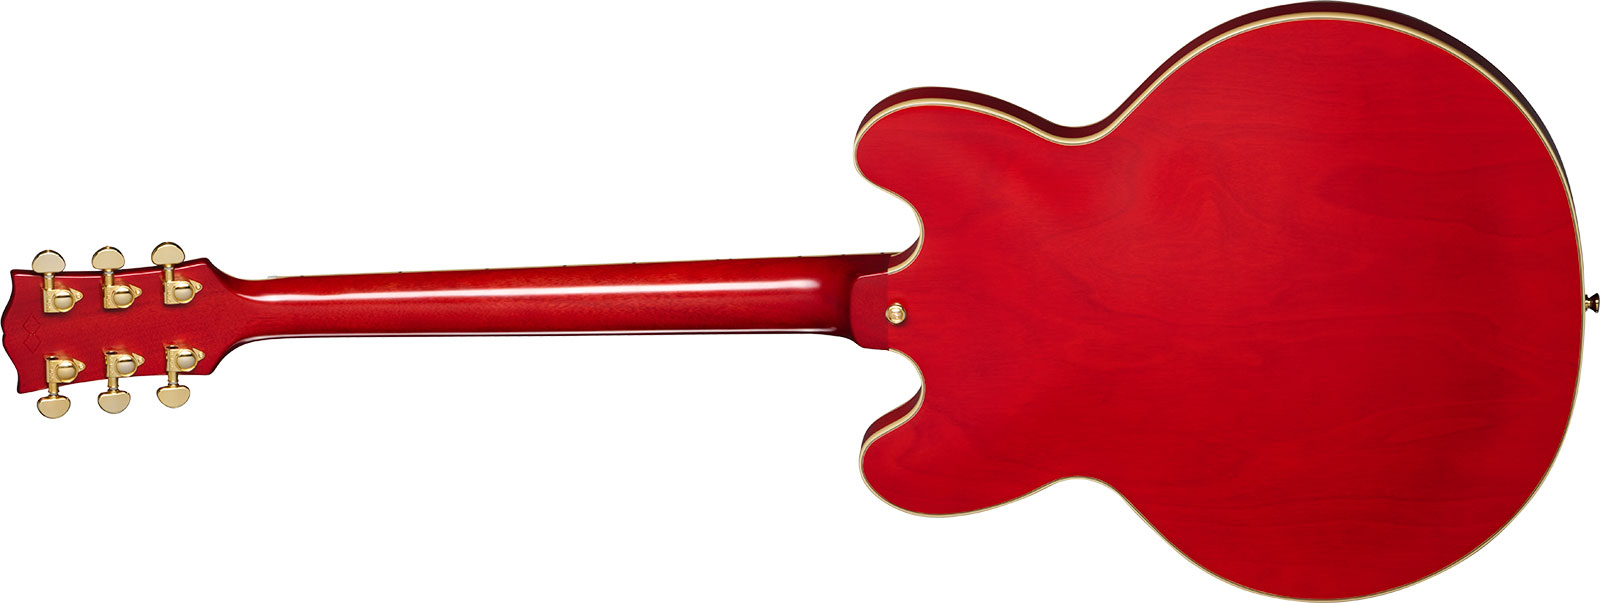 Epiphone Es355 1959 Inspired By 2h Gibson Ht Eb - Vos Cherry Red - Semi-Hollow E-Gitarre - Variation 1